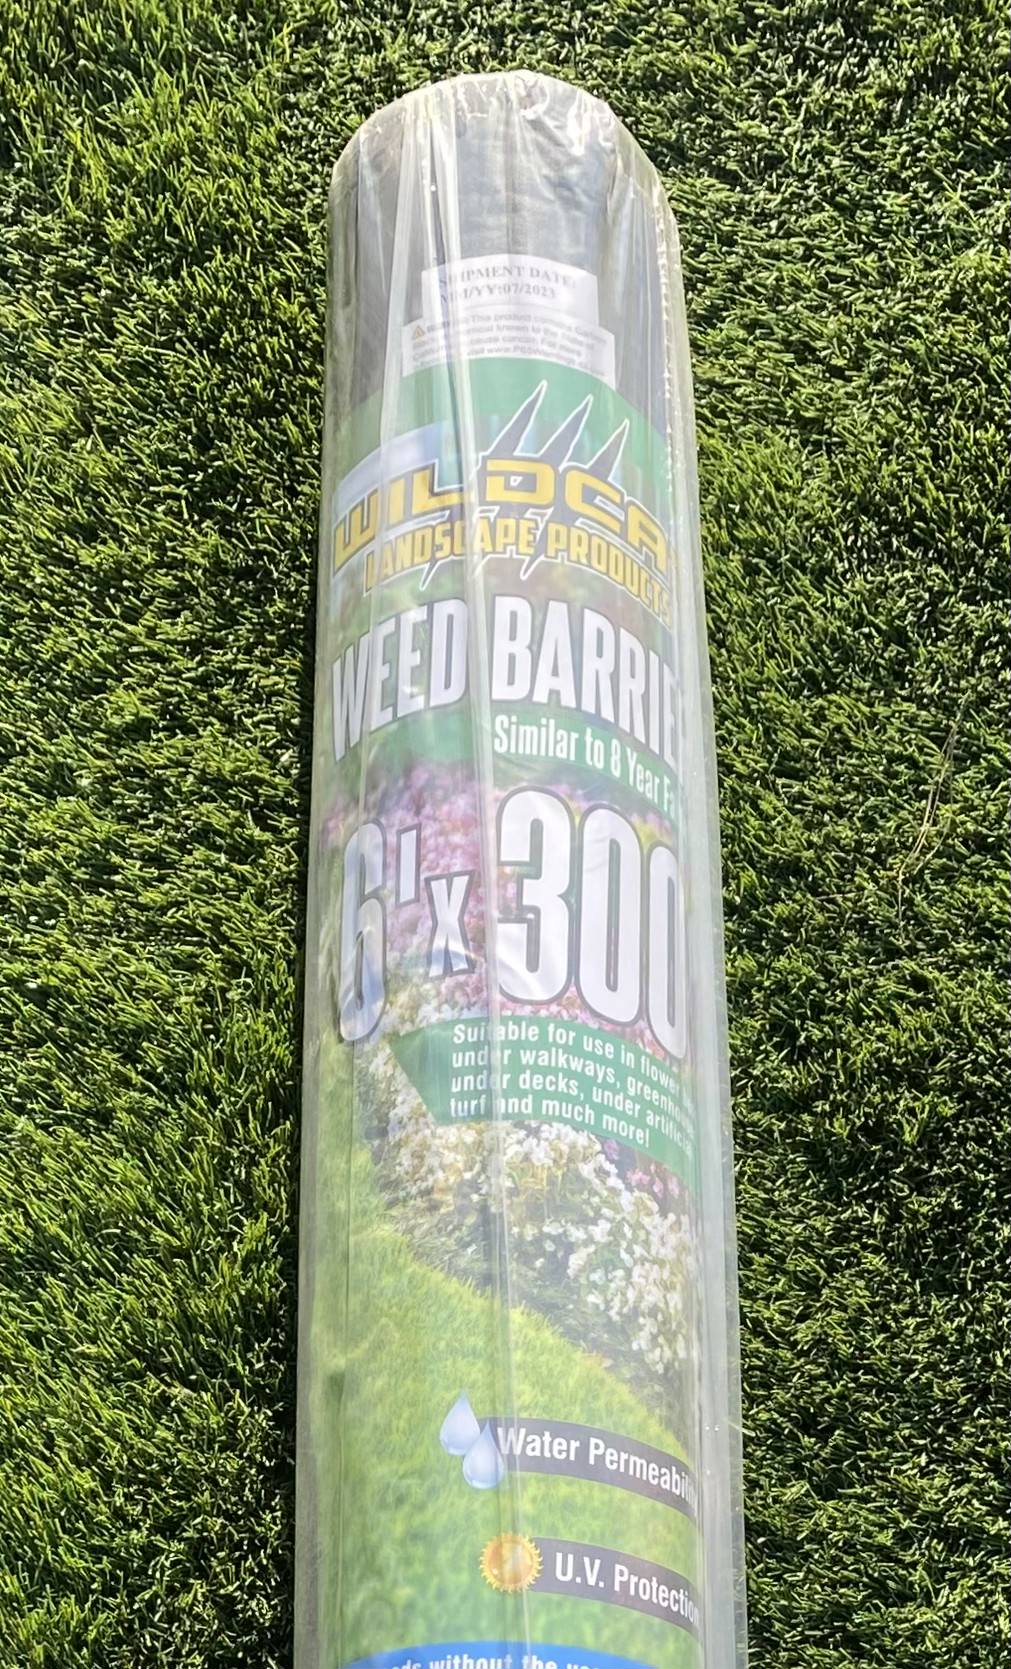 Weed Barrier